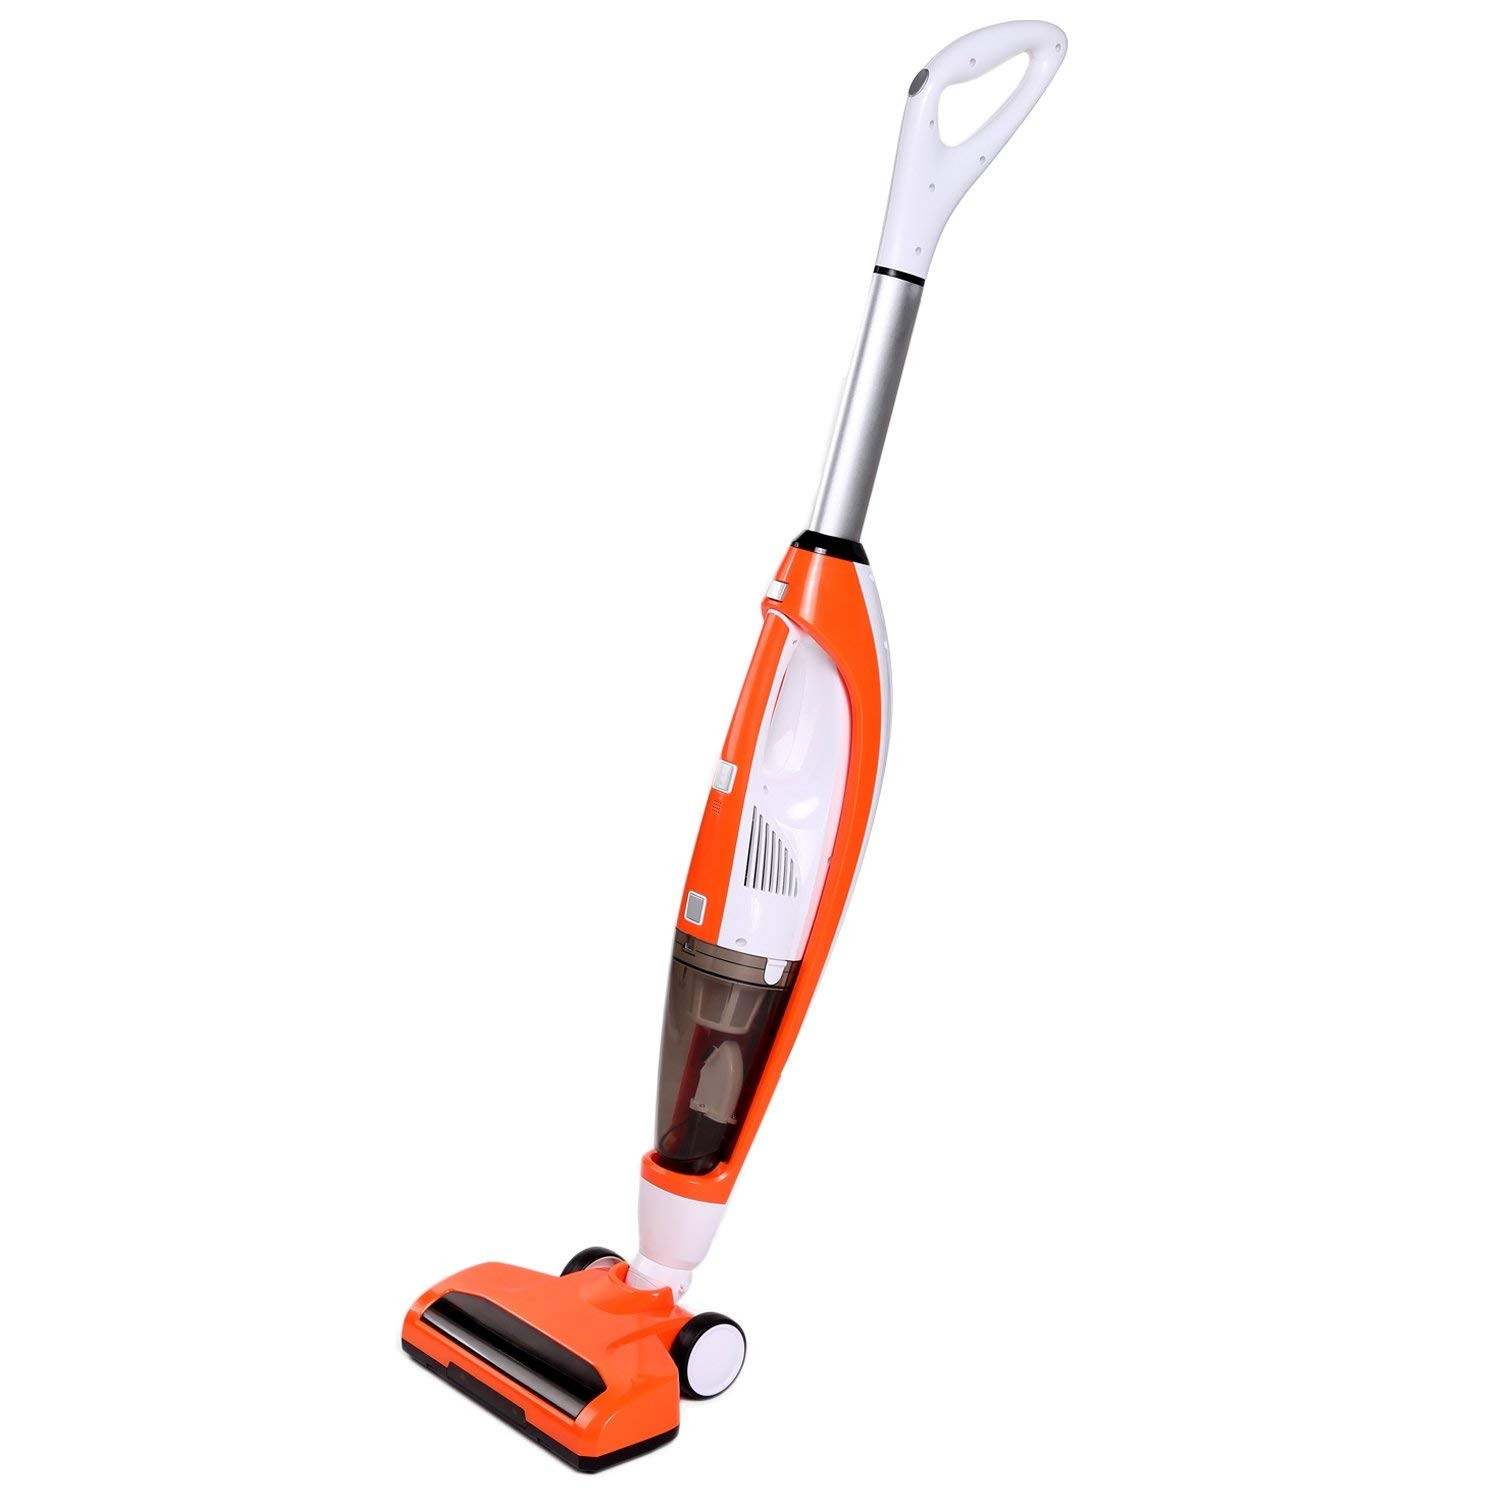 battery operated hardwood floor vacuum of amazon com home cordless vacuum cleaner 3 in 1 cleaning upright throughout amazon com home cordless vacuum cleaner 3 in 1 cleaning upright handheld battery operated for hard floor carpet